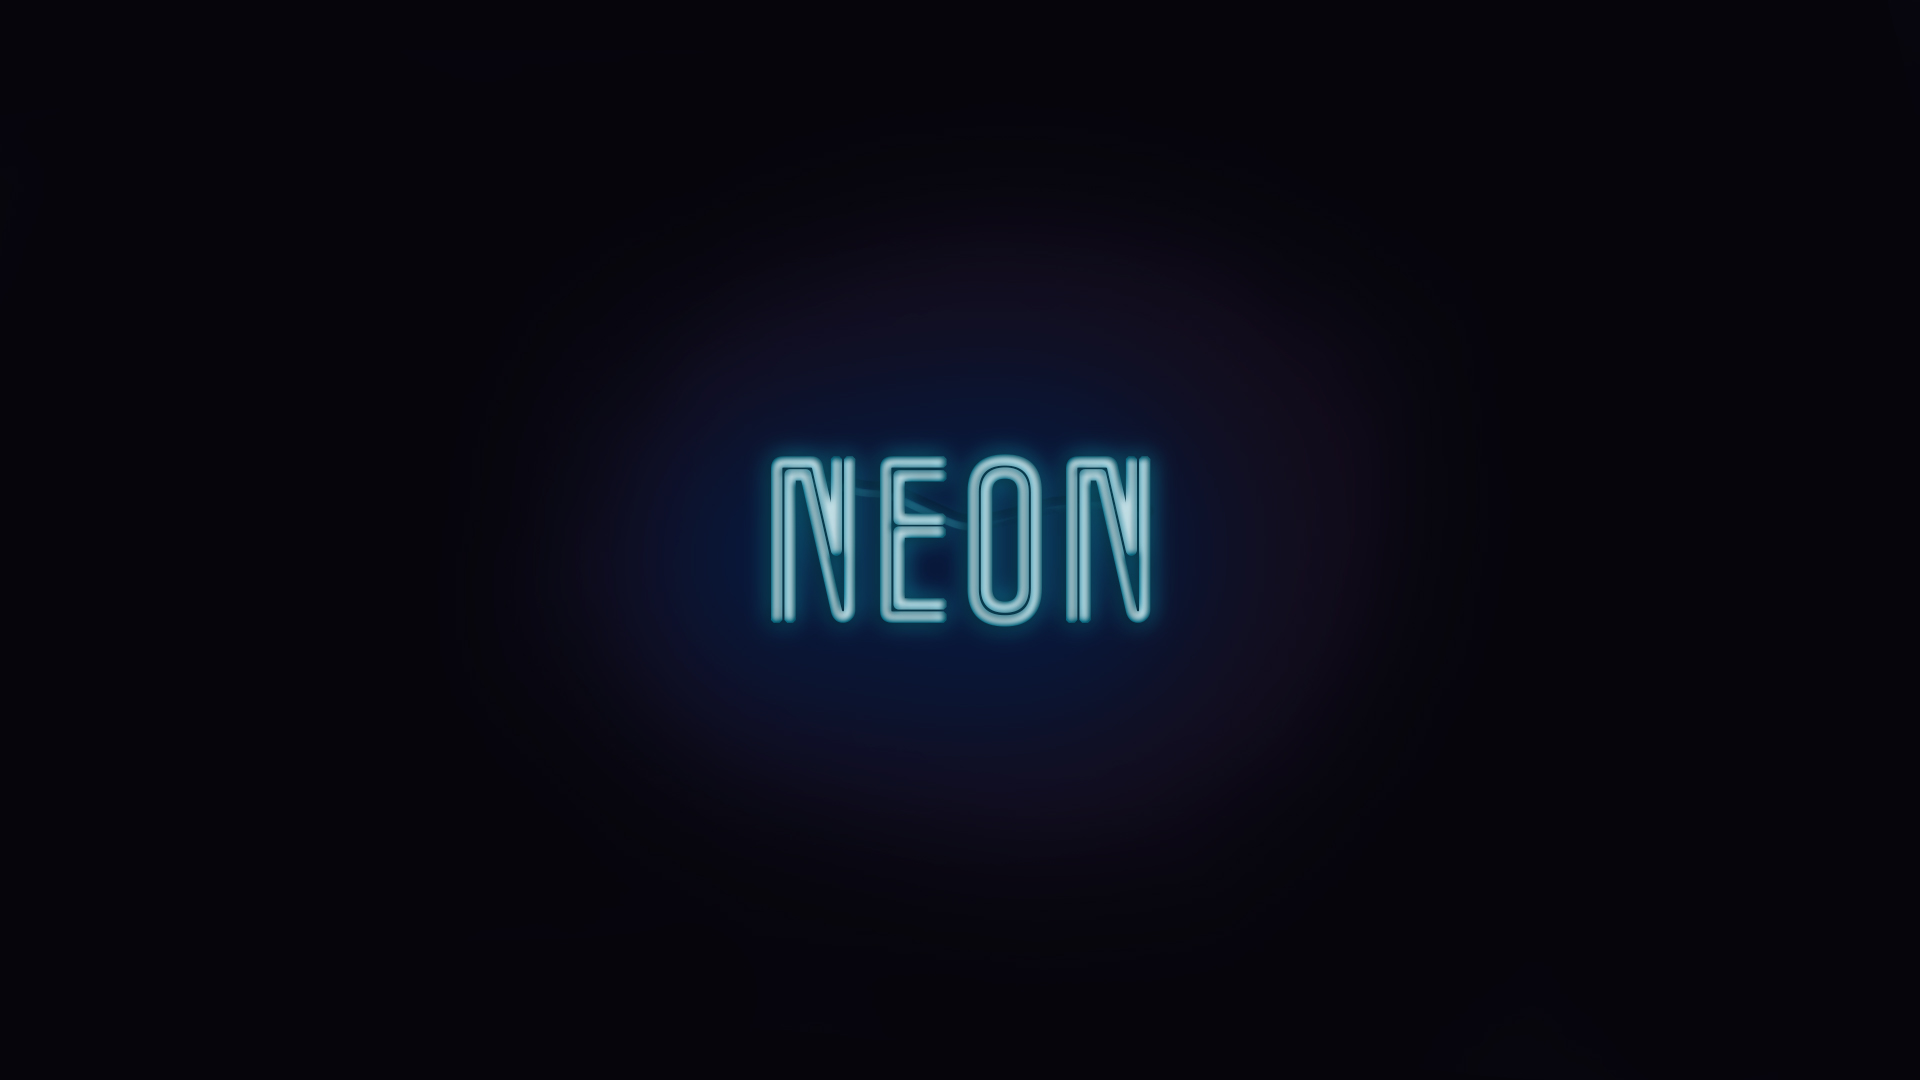 General 1920x1080 neon text simple background black background blue